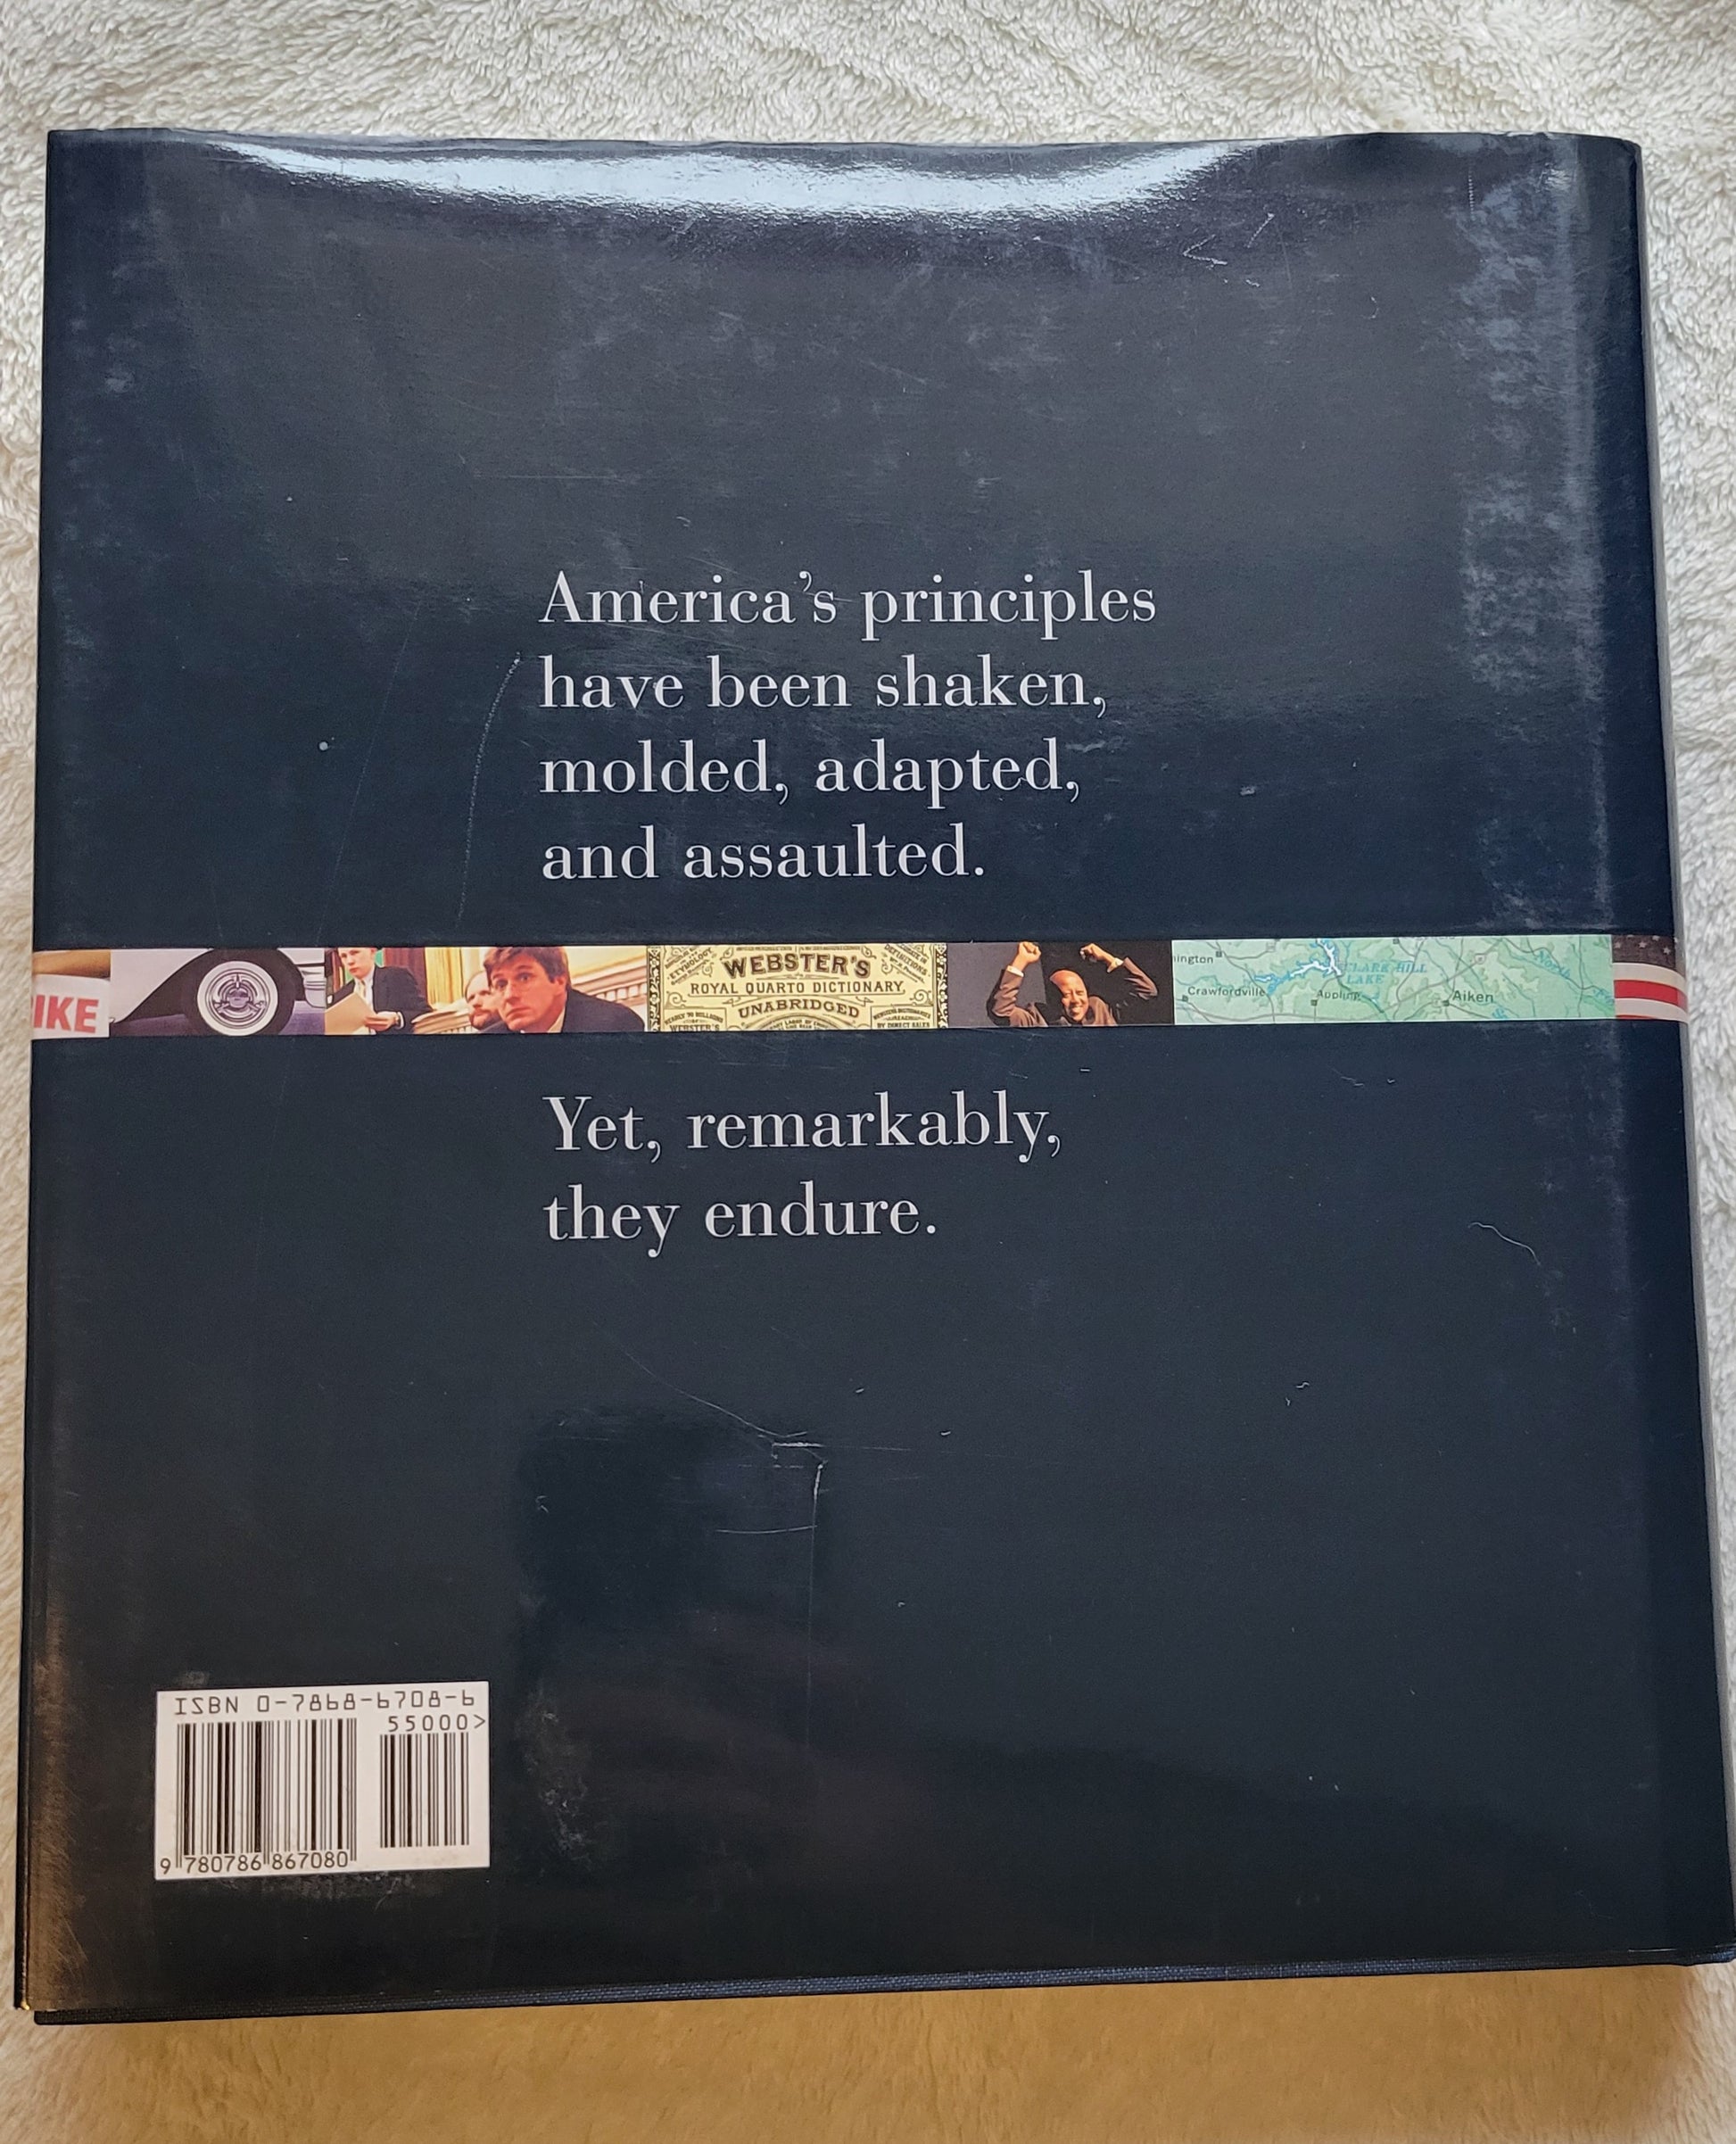 Used book for sale "In Search of America" by Peter Jennings and Todd Brewster, published by Hyperion, 2002, first edition. View of back cover.